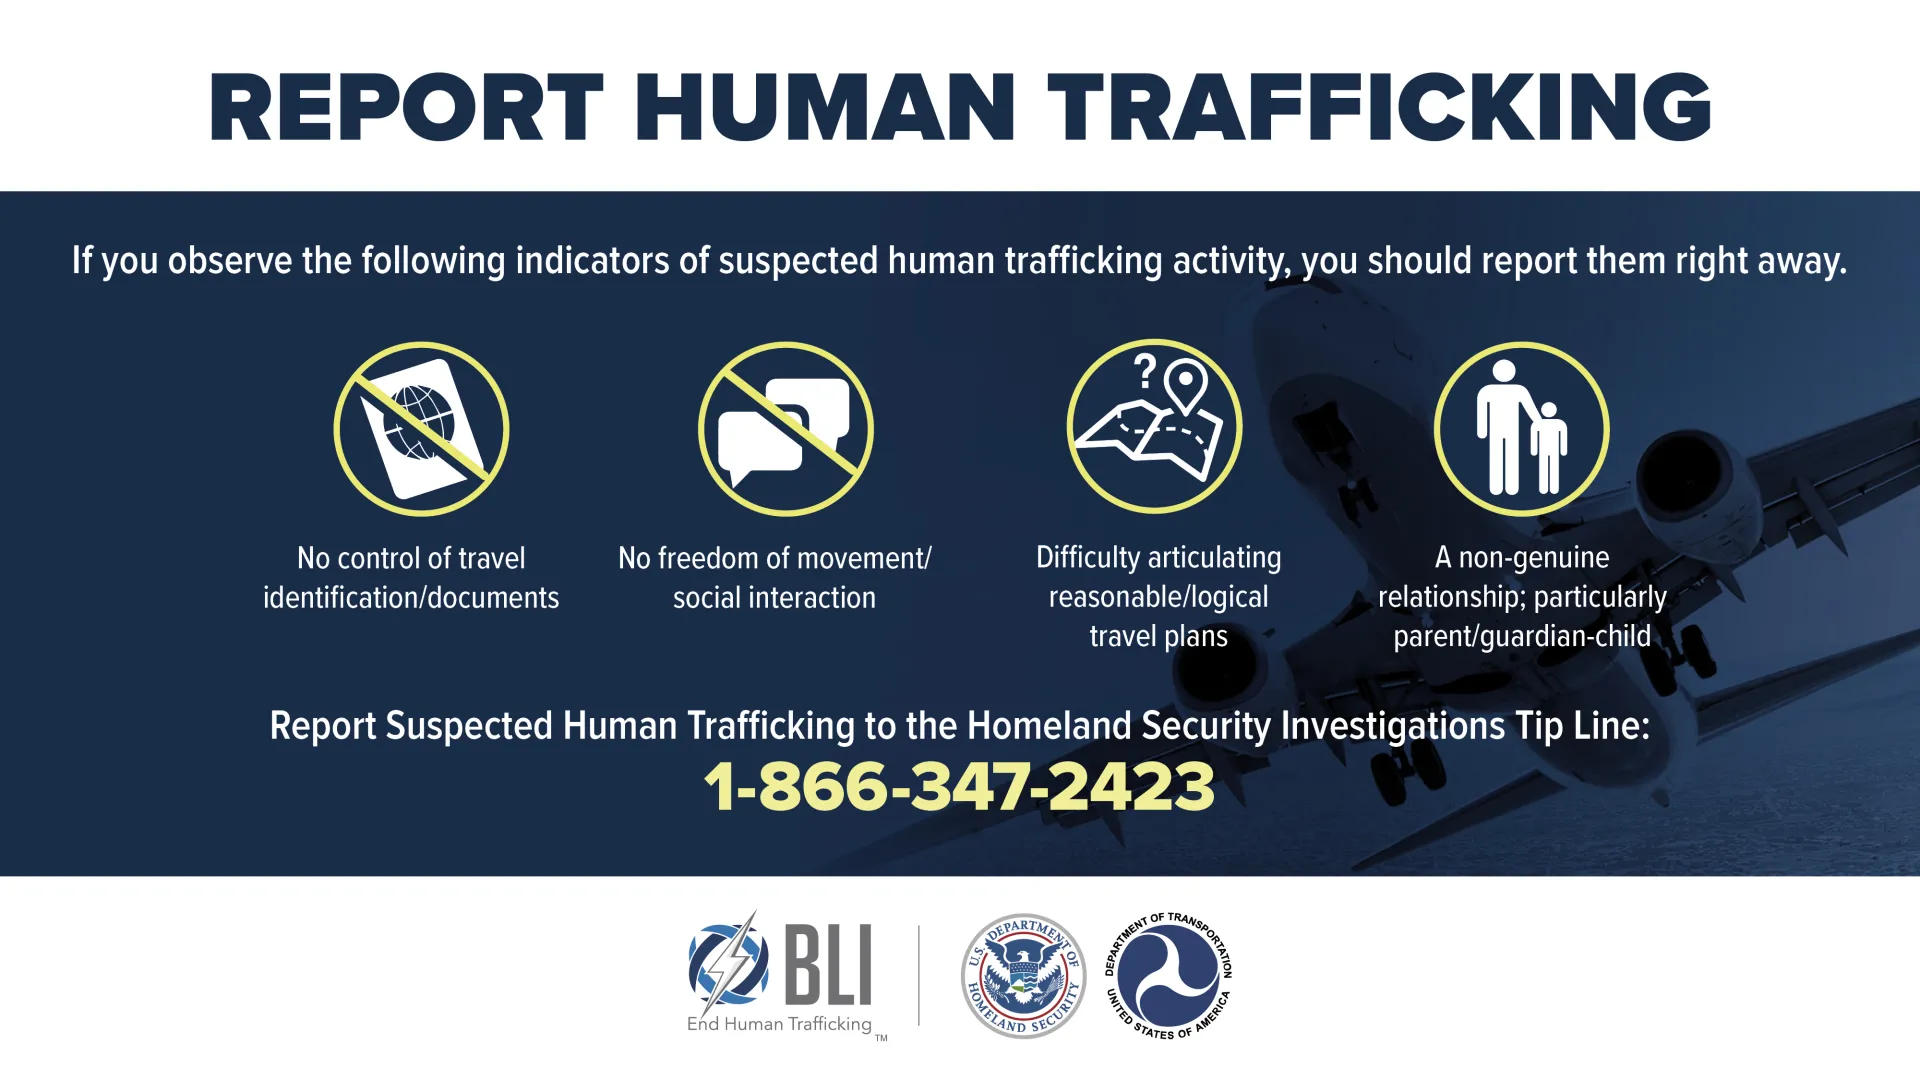 Report Human Trafficking - BLI airport ad outlining what to do if you observe indicators of suspected human trafficking activity